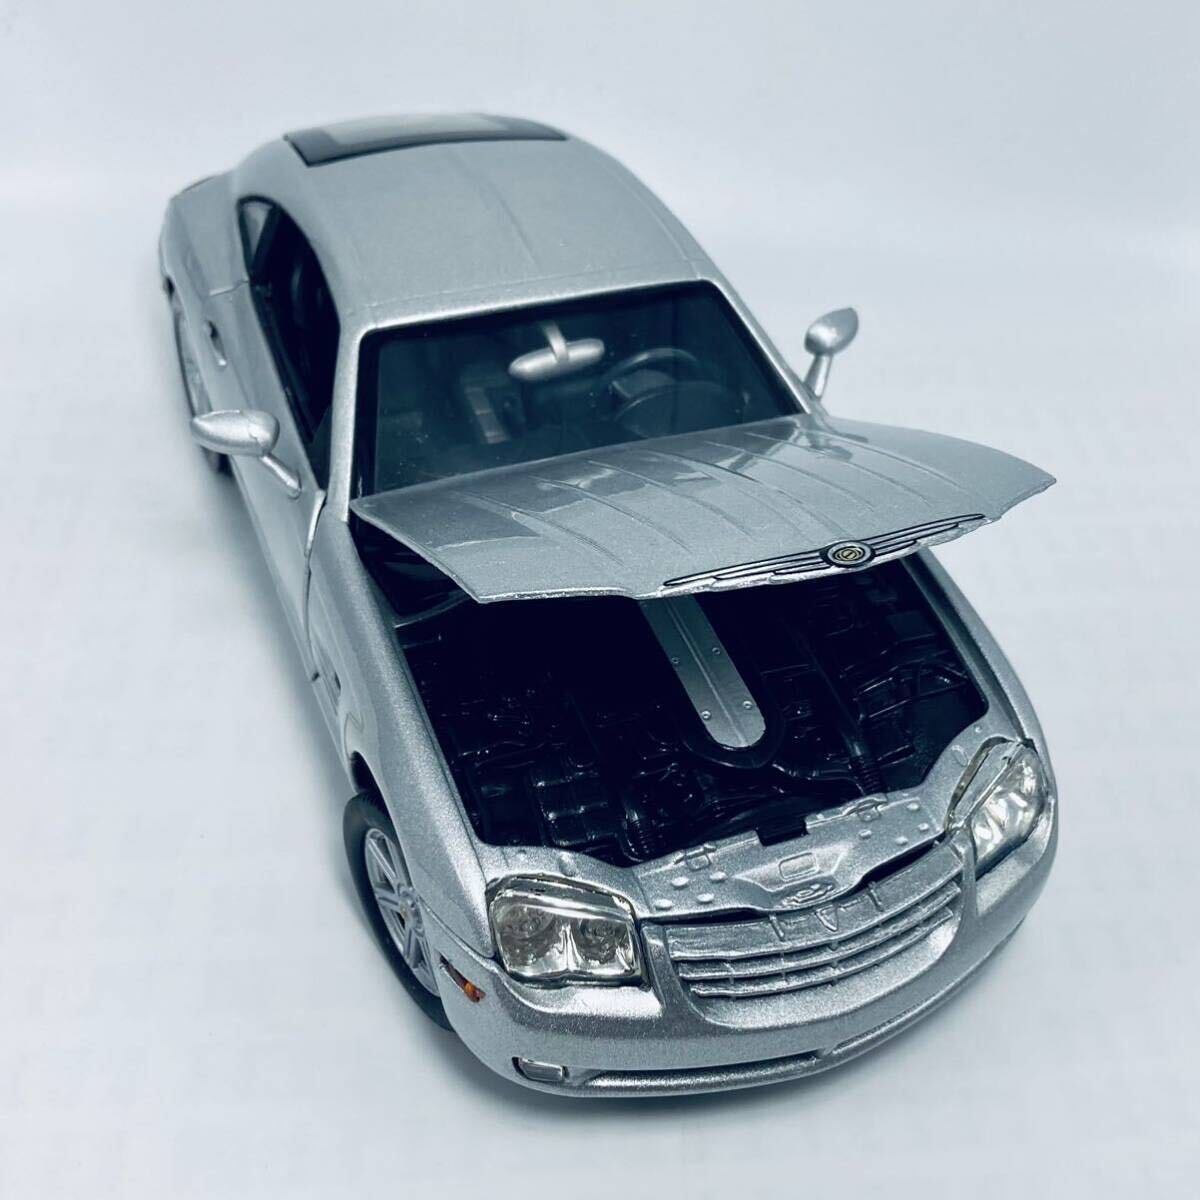  out of print goods rare model SOLIDO 1/18 CHRYSLER CROSSFIRE 2002 Chrysler Crossfire Silver